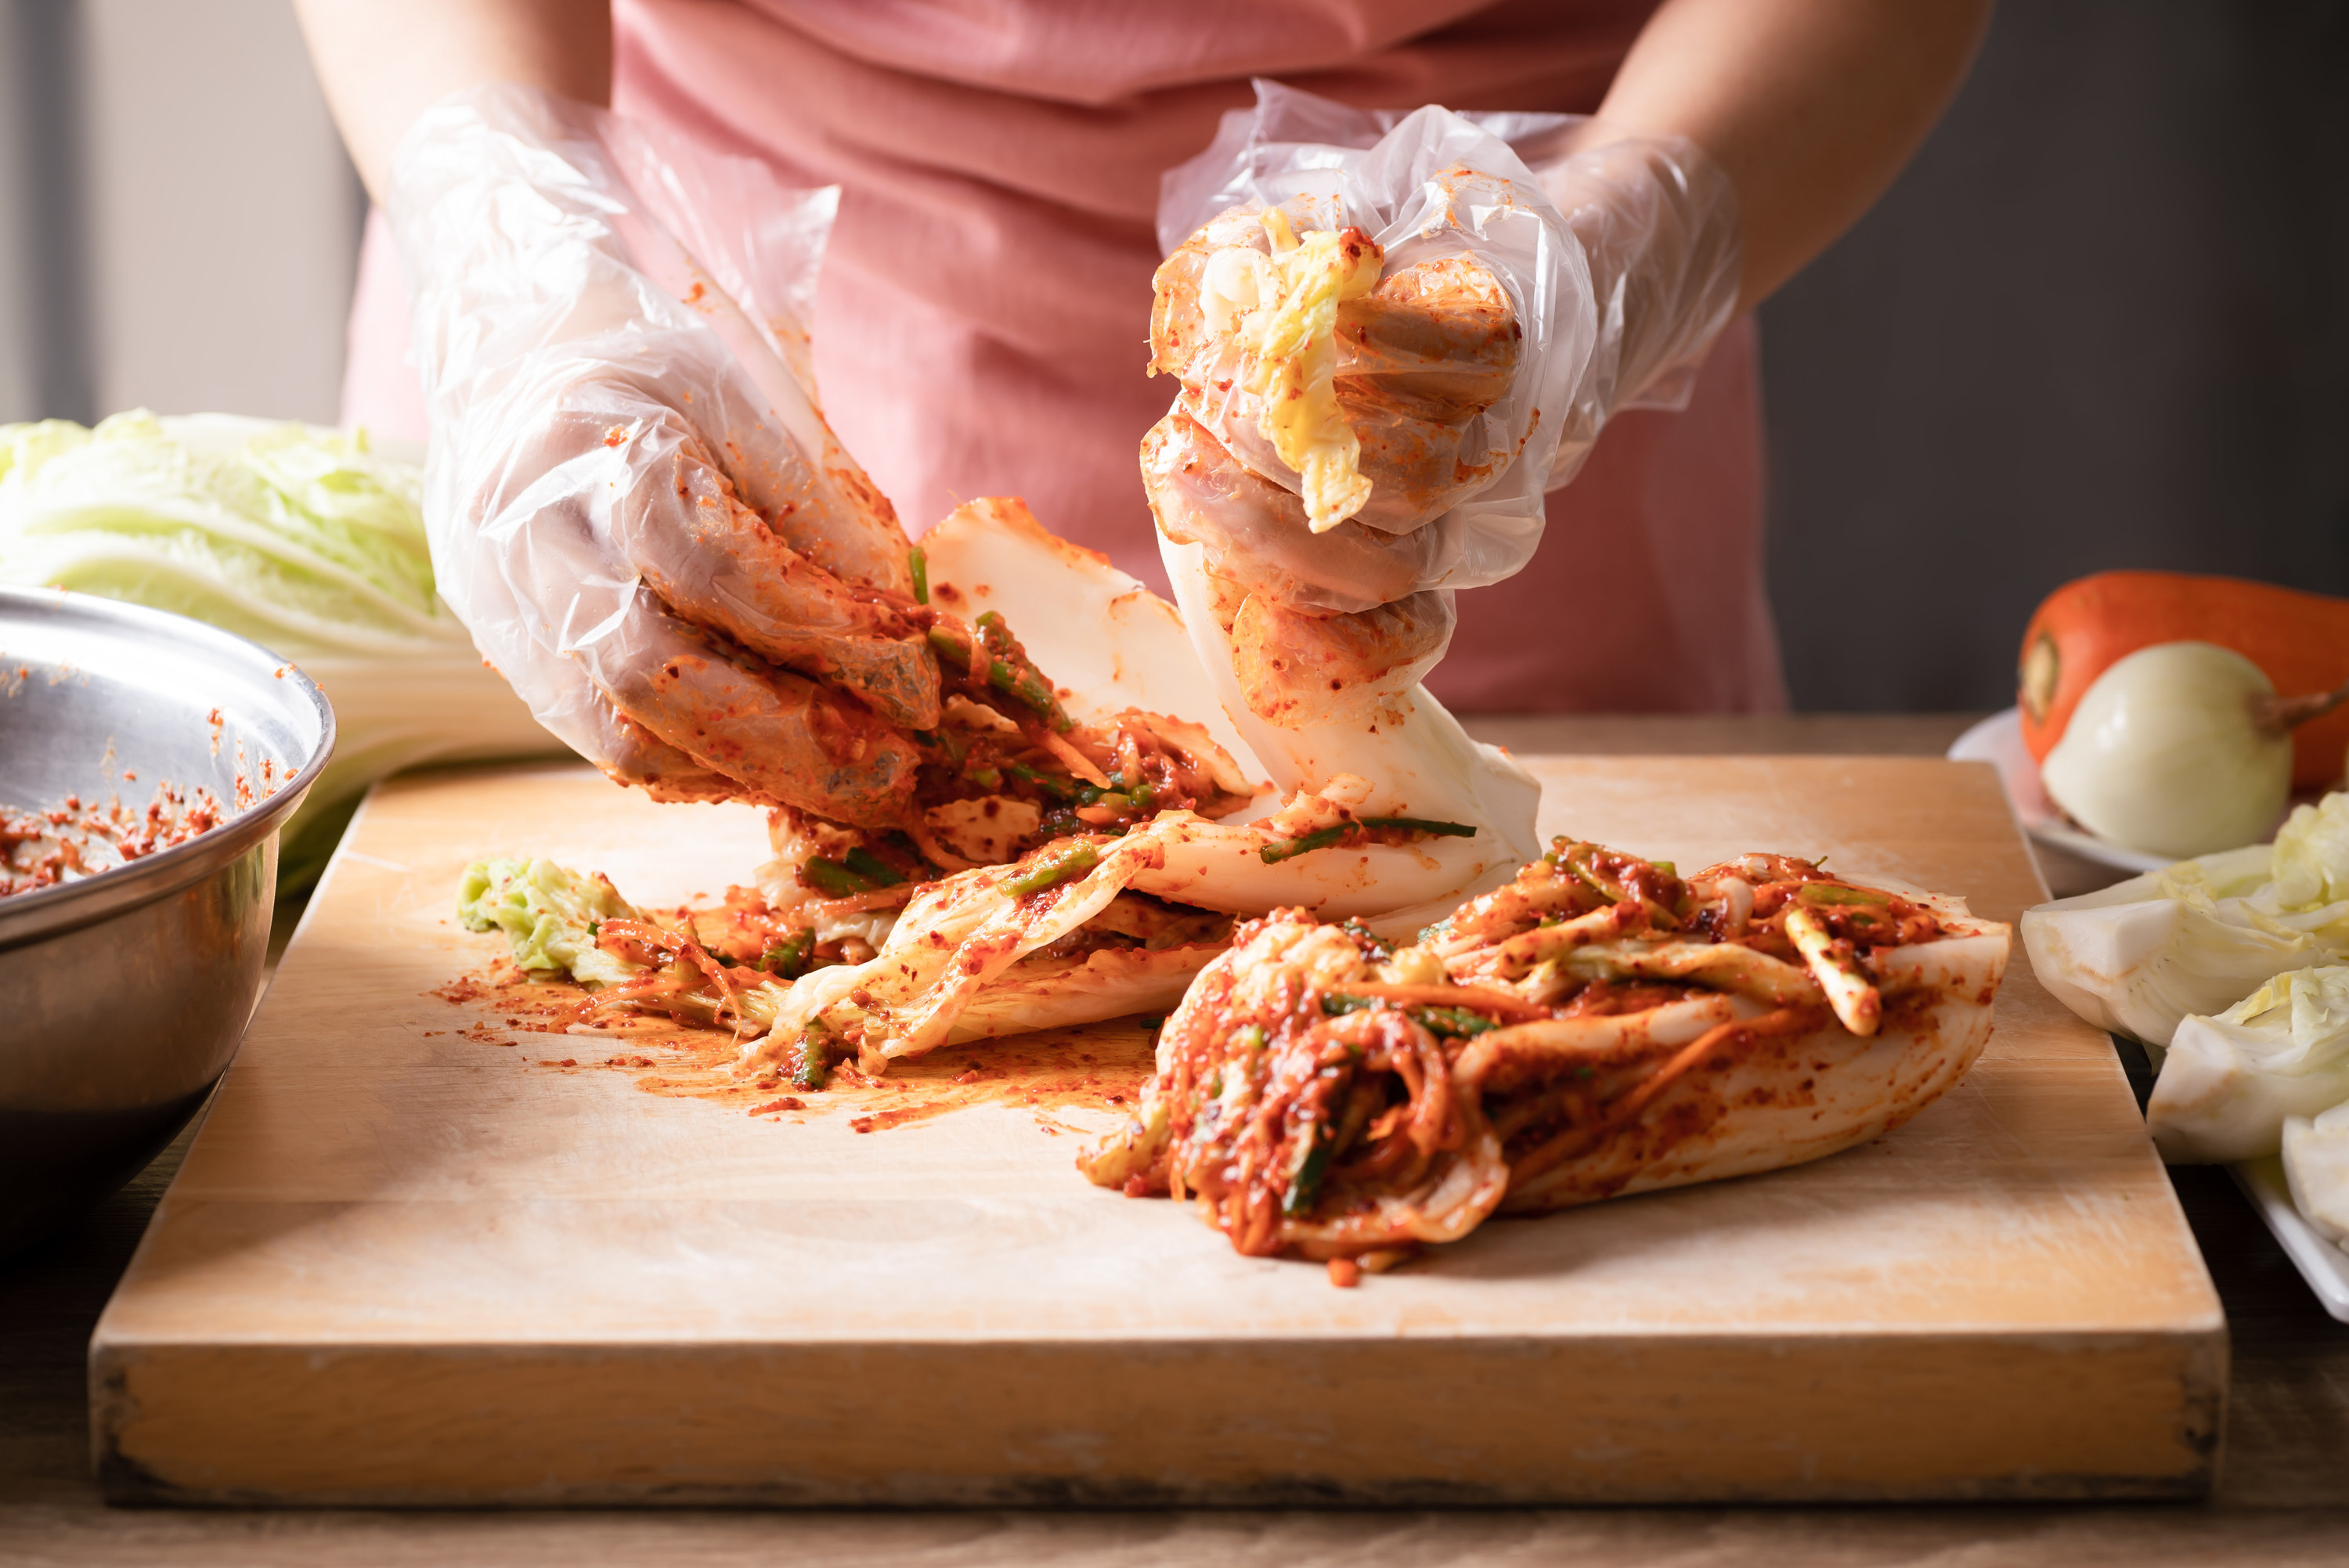 A person handling kimchi with gloves on